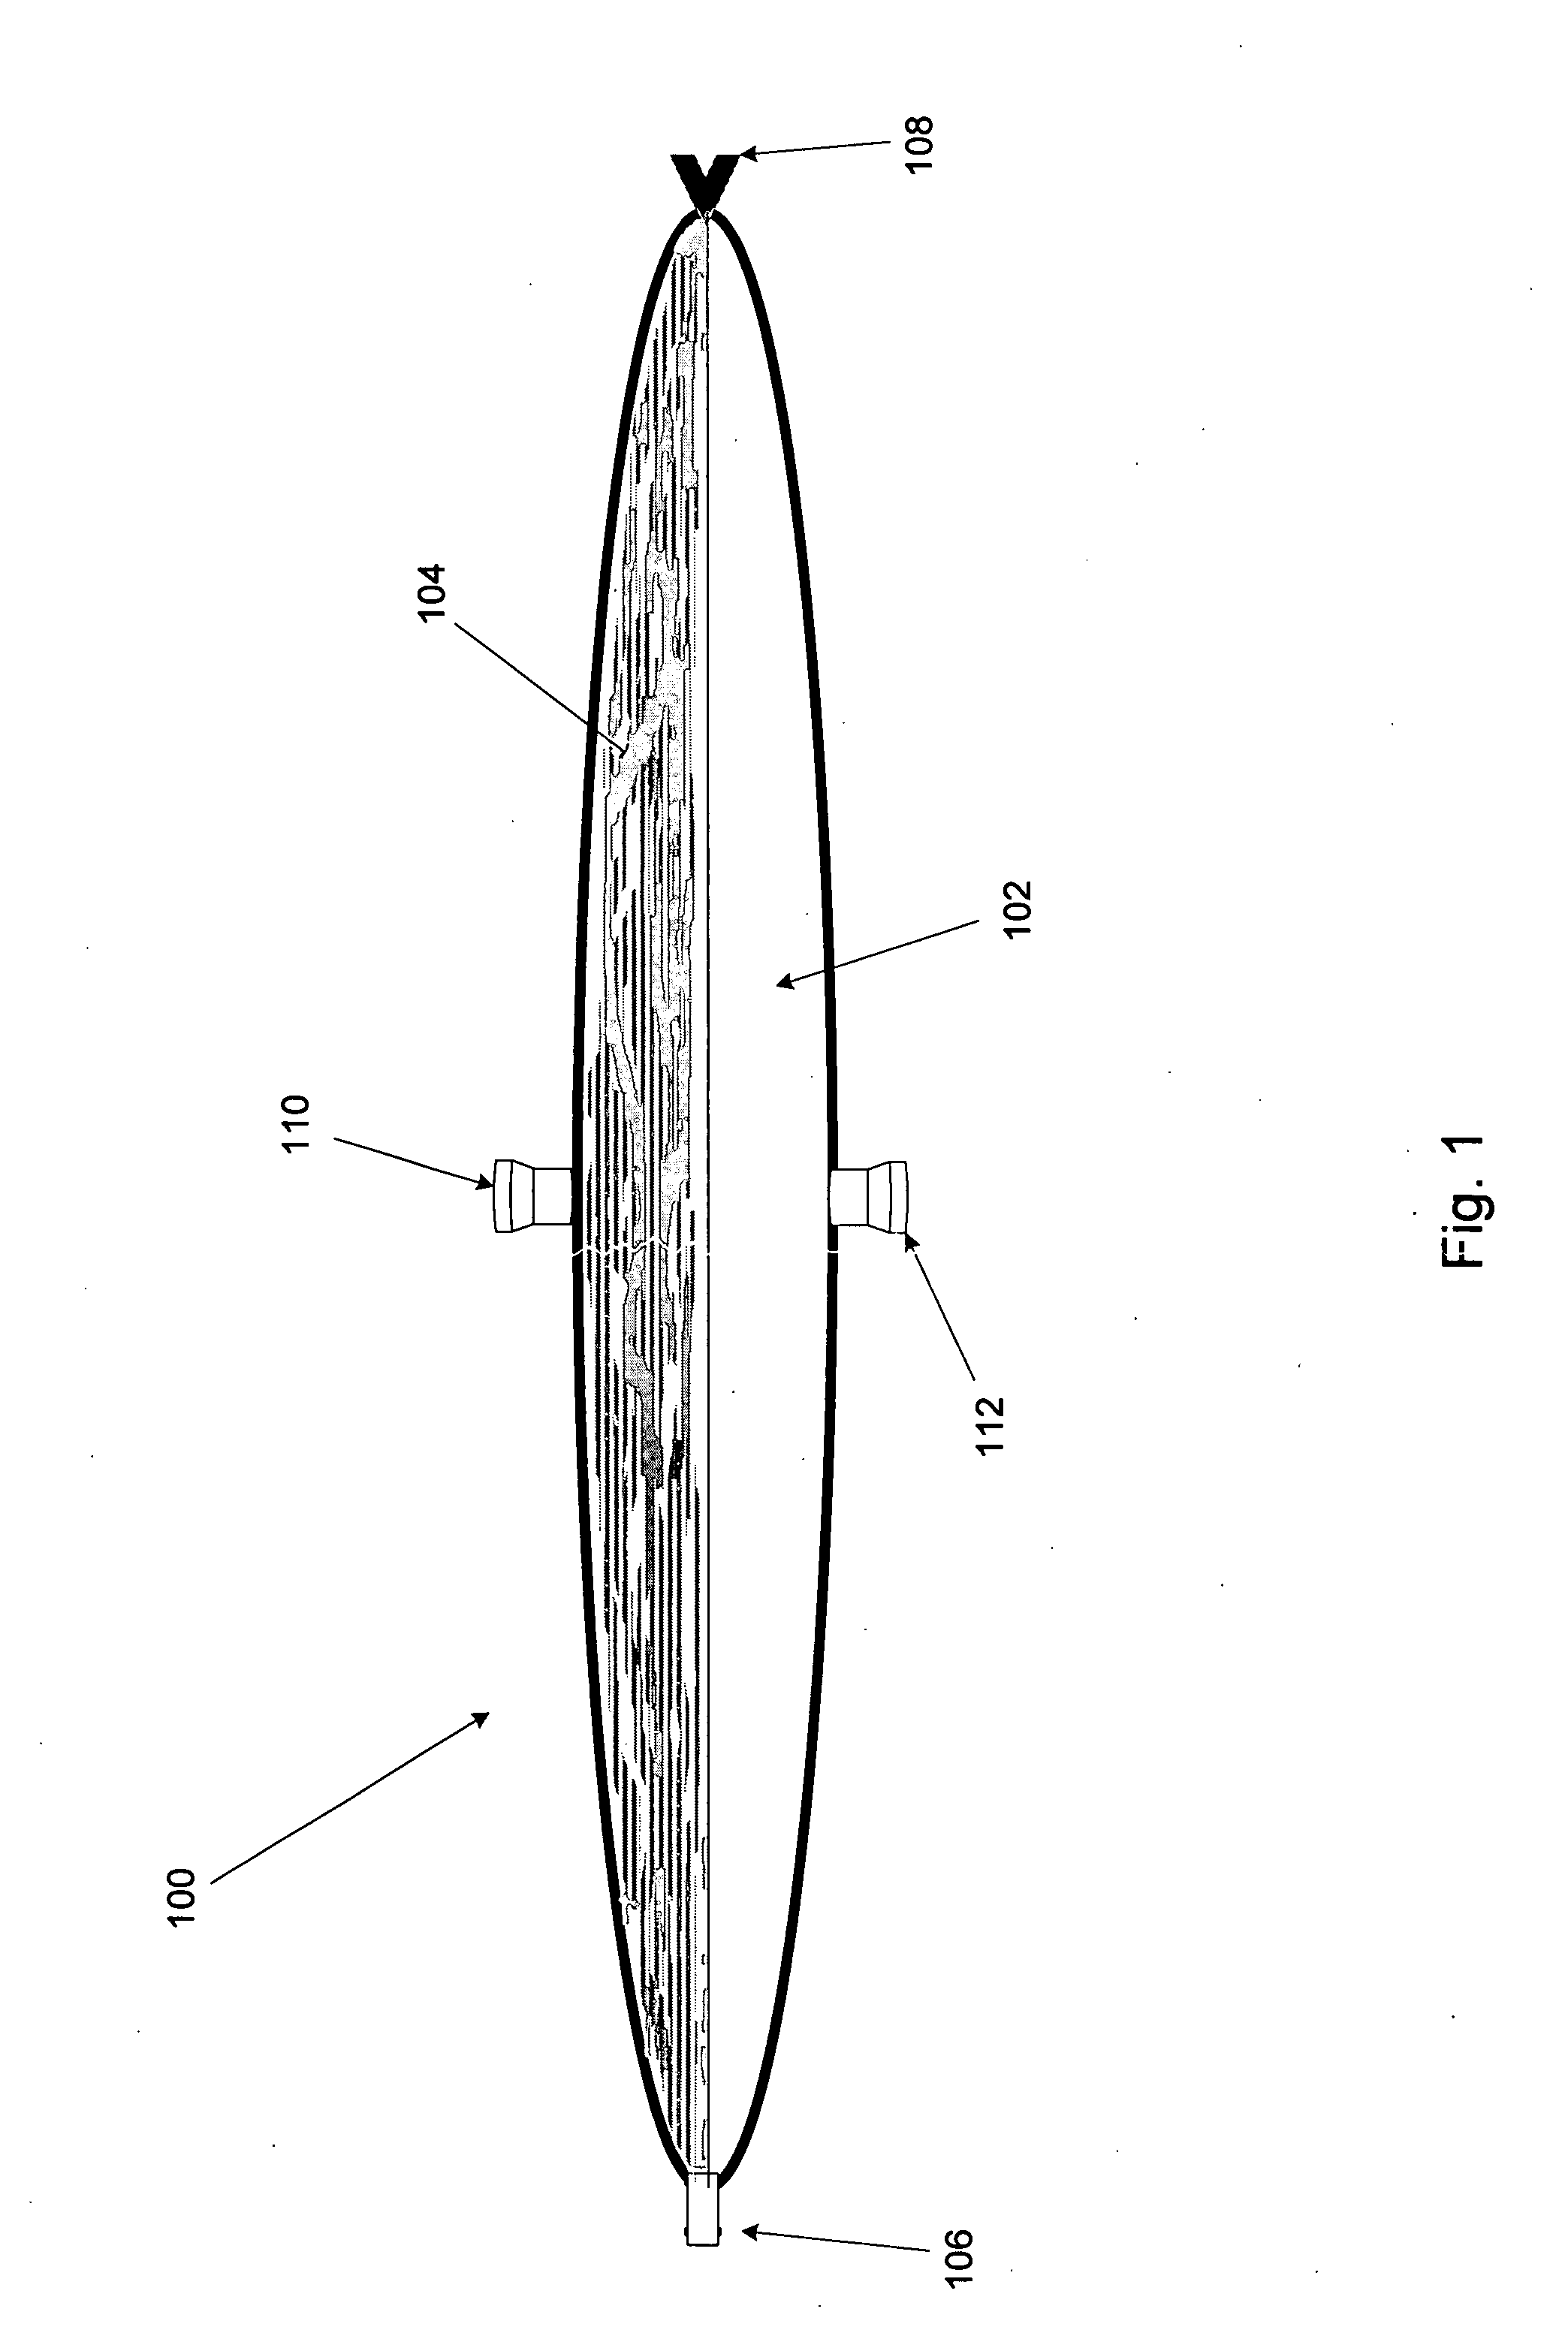 Method and system for generating renewable energy